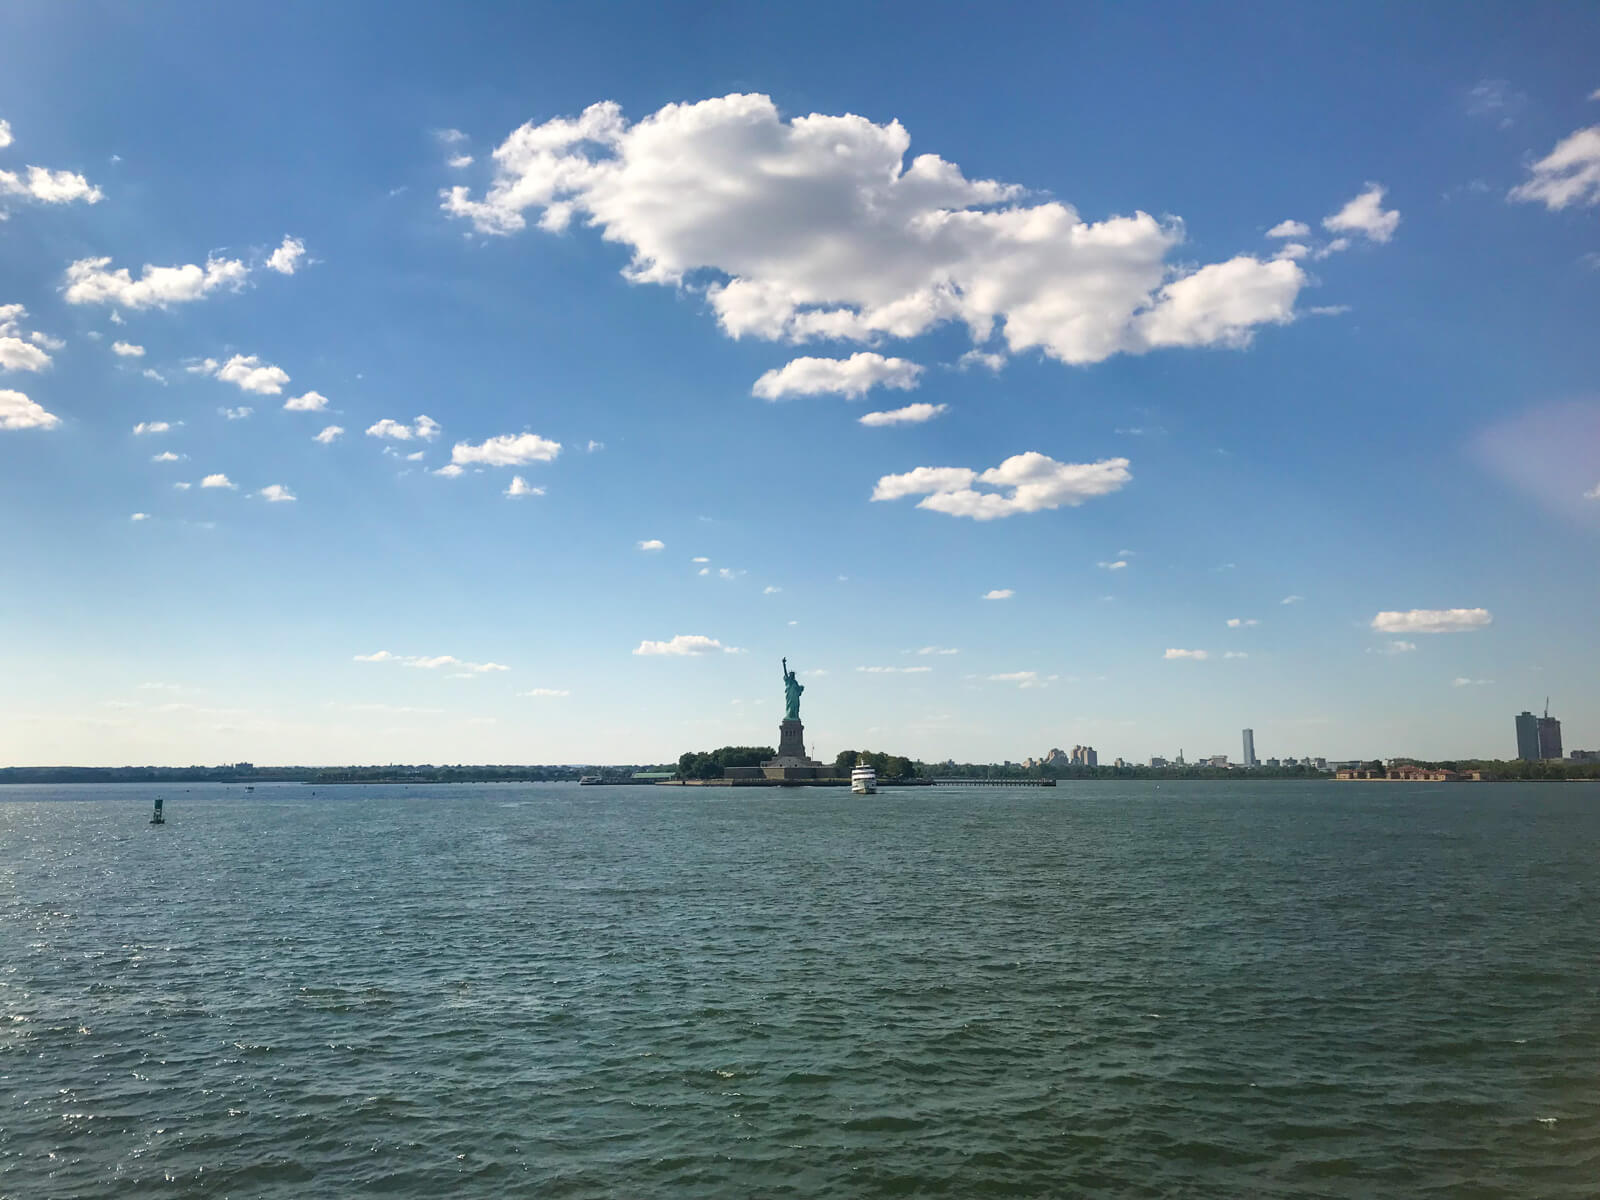 A view from a ferry of the Statue of Liberty, with a lot of the ocean visible around it. The sky is blue and has few clouds